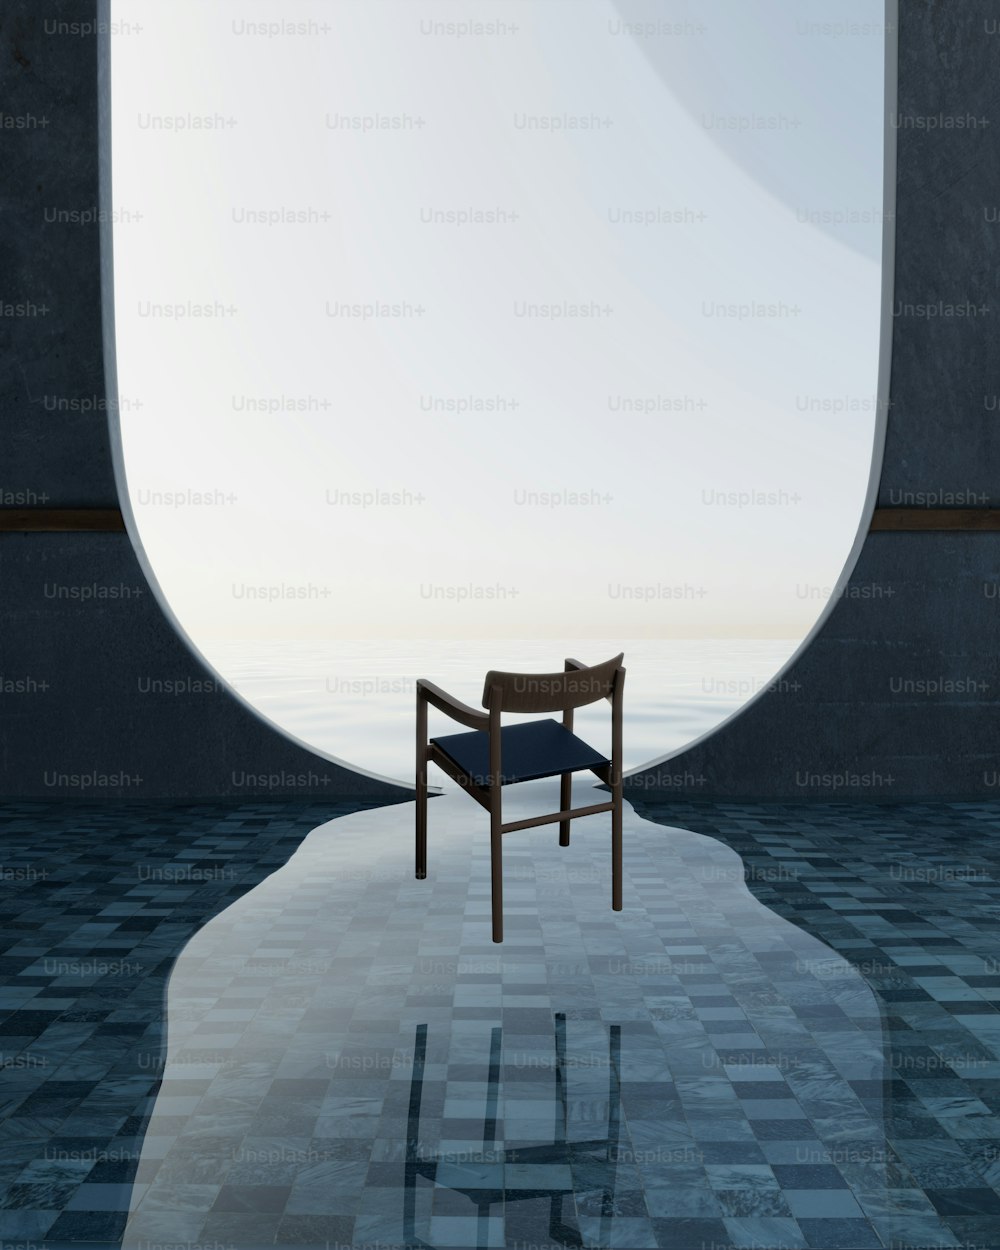 a chair sitting in the middle of a room